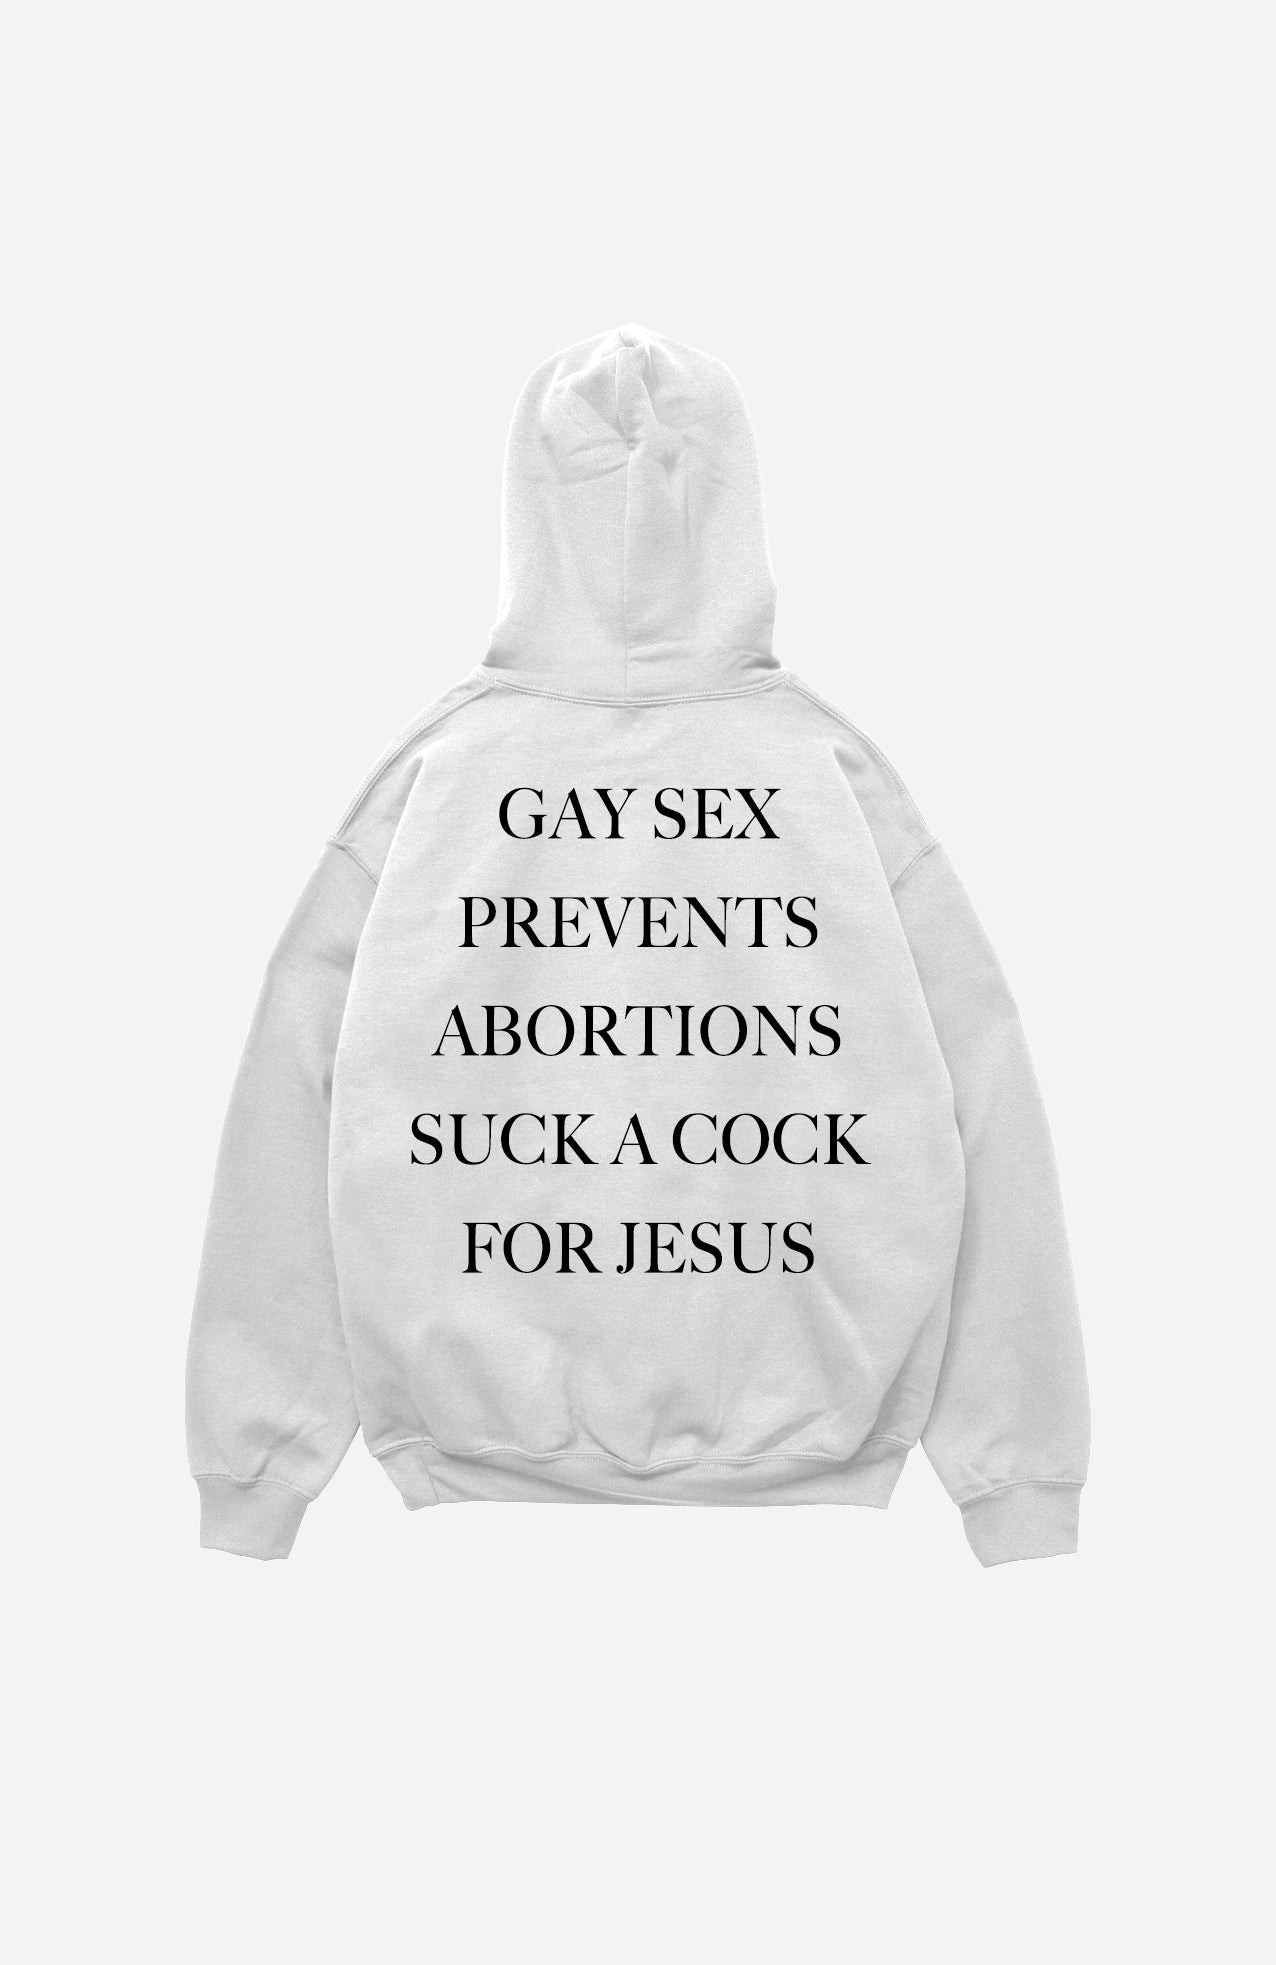 ABORTION PULLOVER WHITE